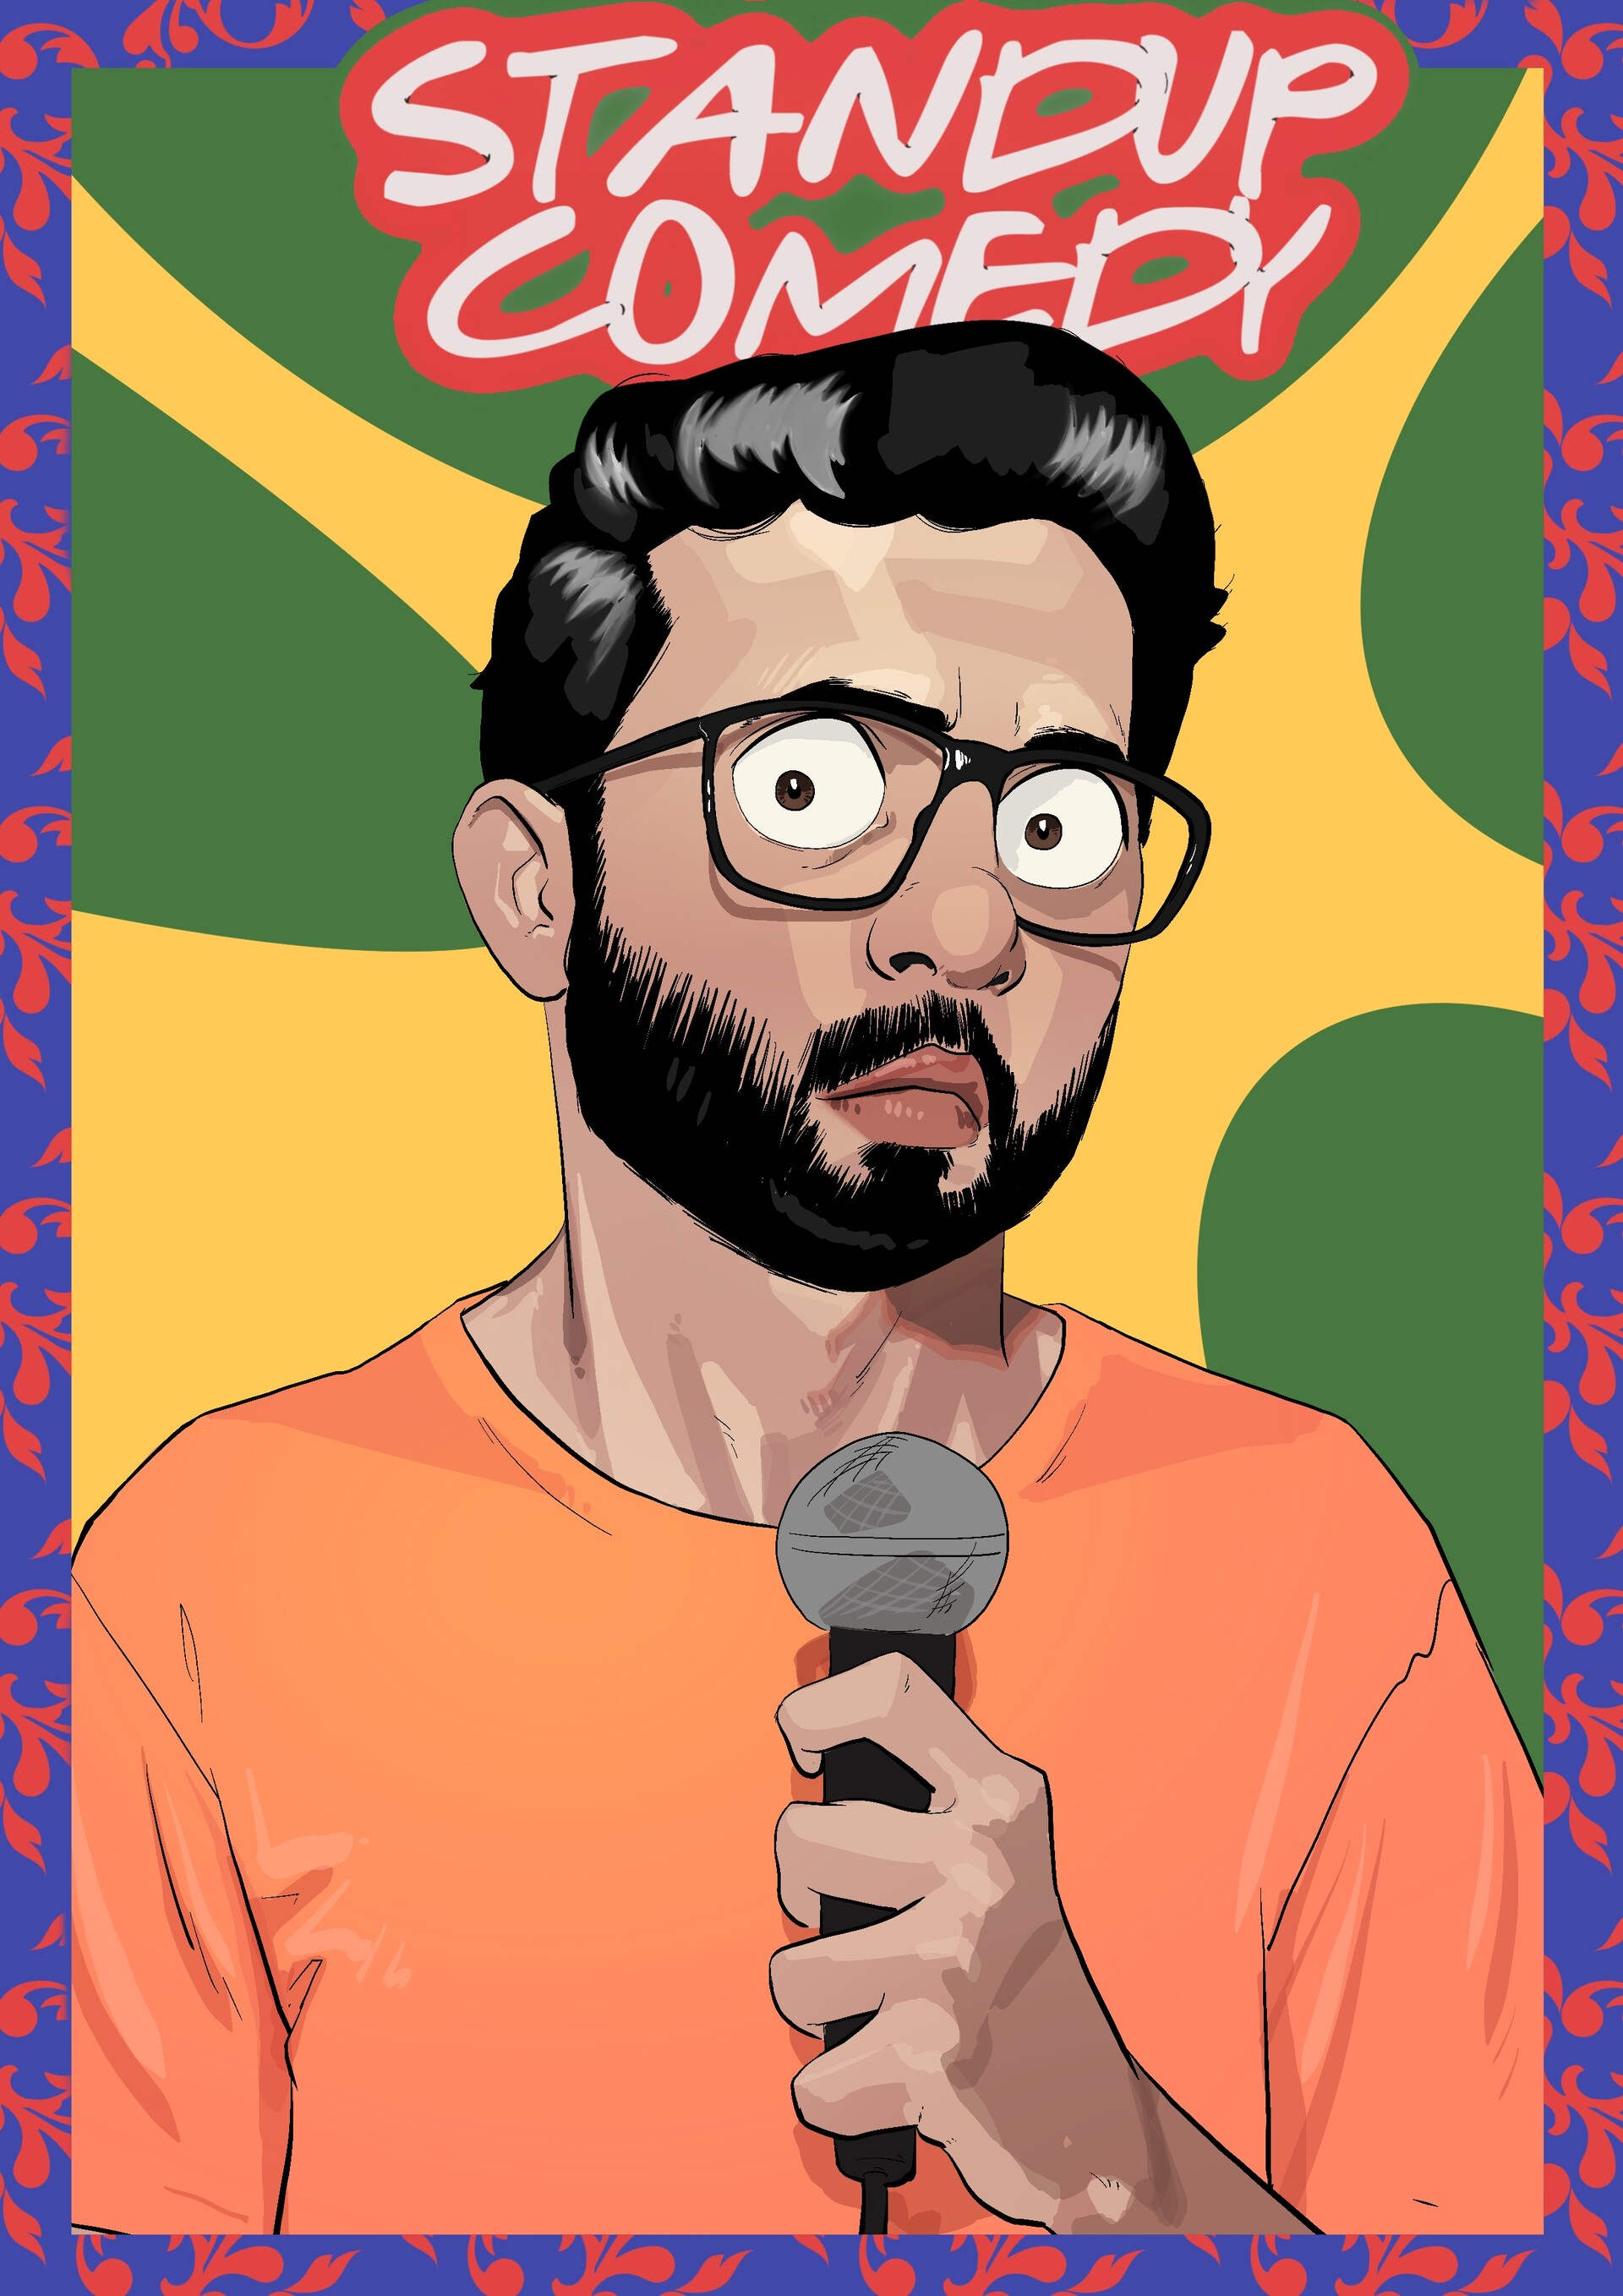 ArtStation - Stand up comedy poster